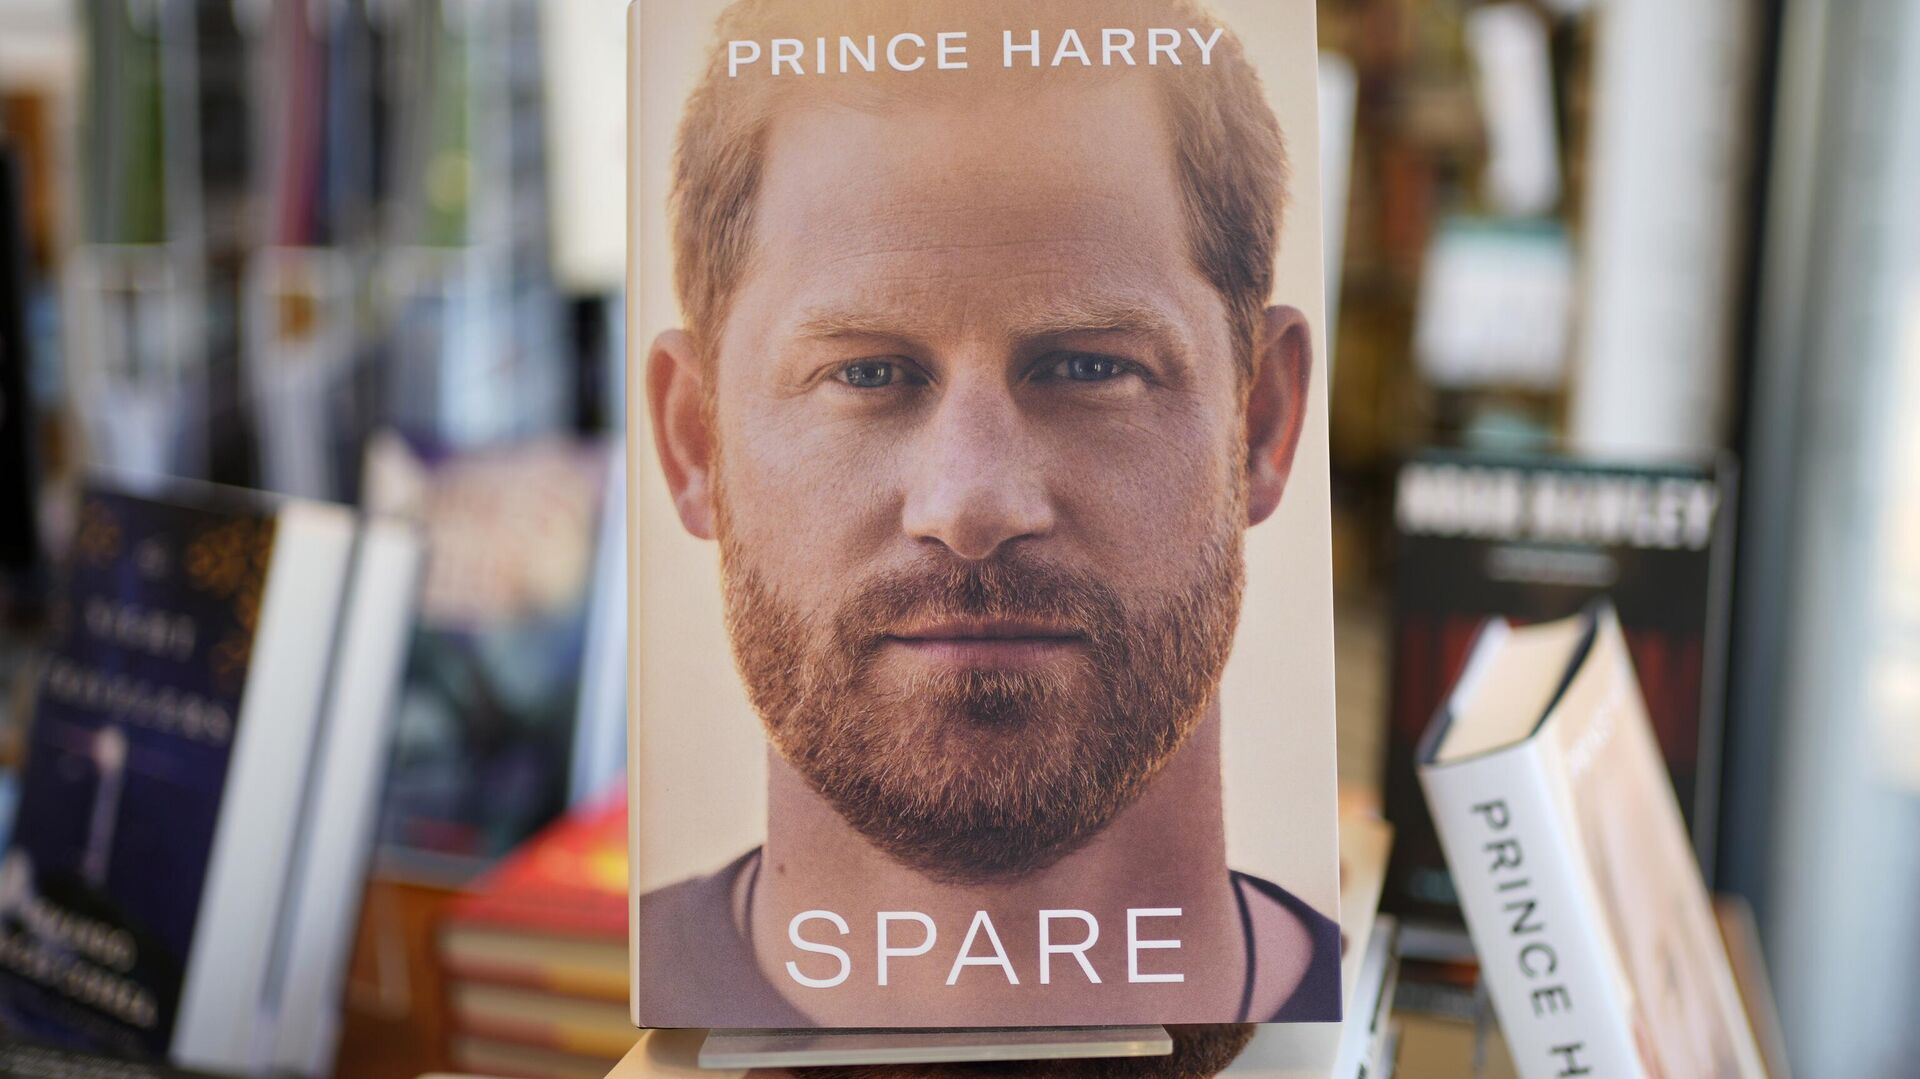 Copies of the new book by Prince Harry called Spare are displayed at Sherman's book store in Freeport, Maine, Tuesday, Jan. 10, 2023. - Sputnik International, 1920, 22.03.2023